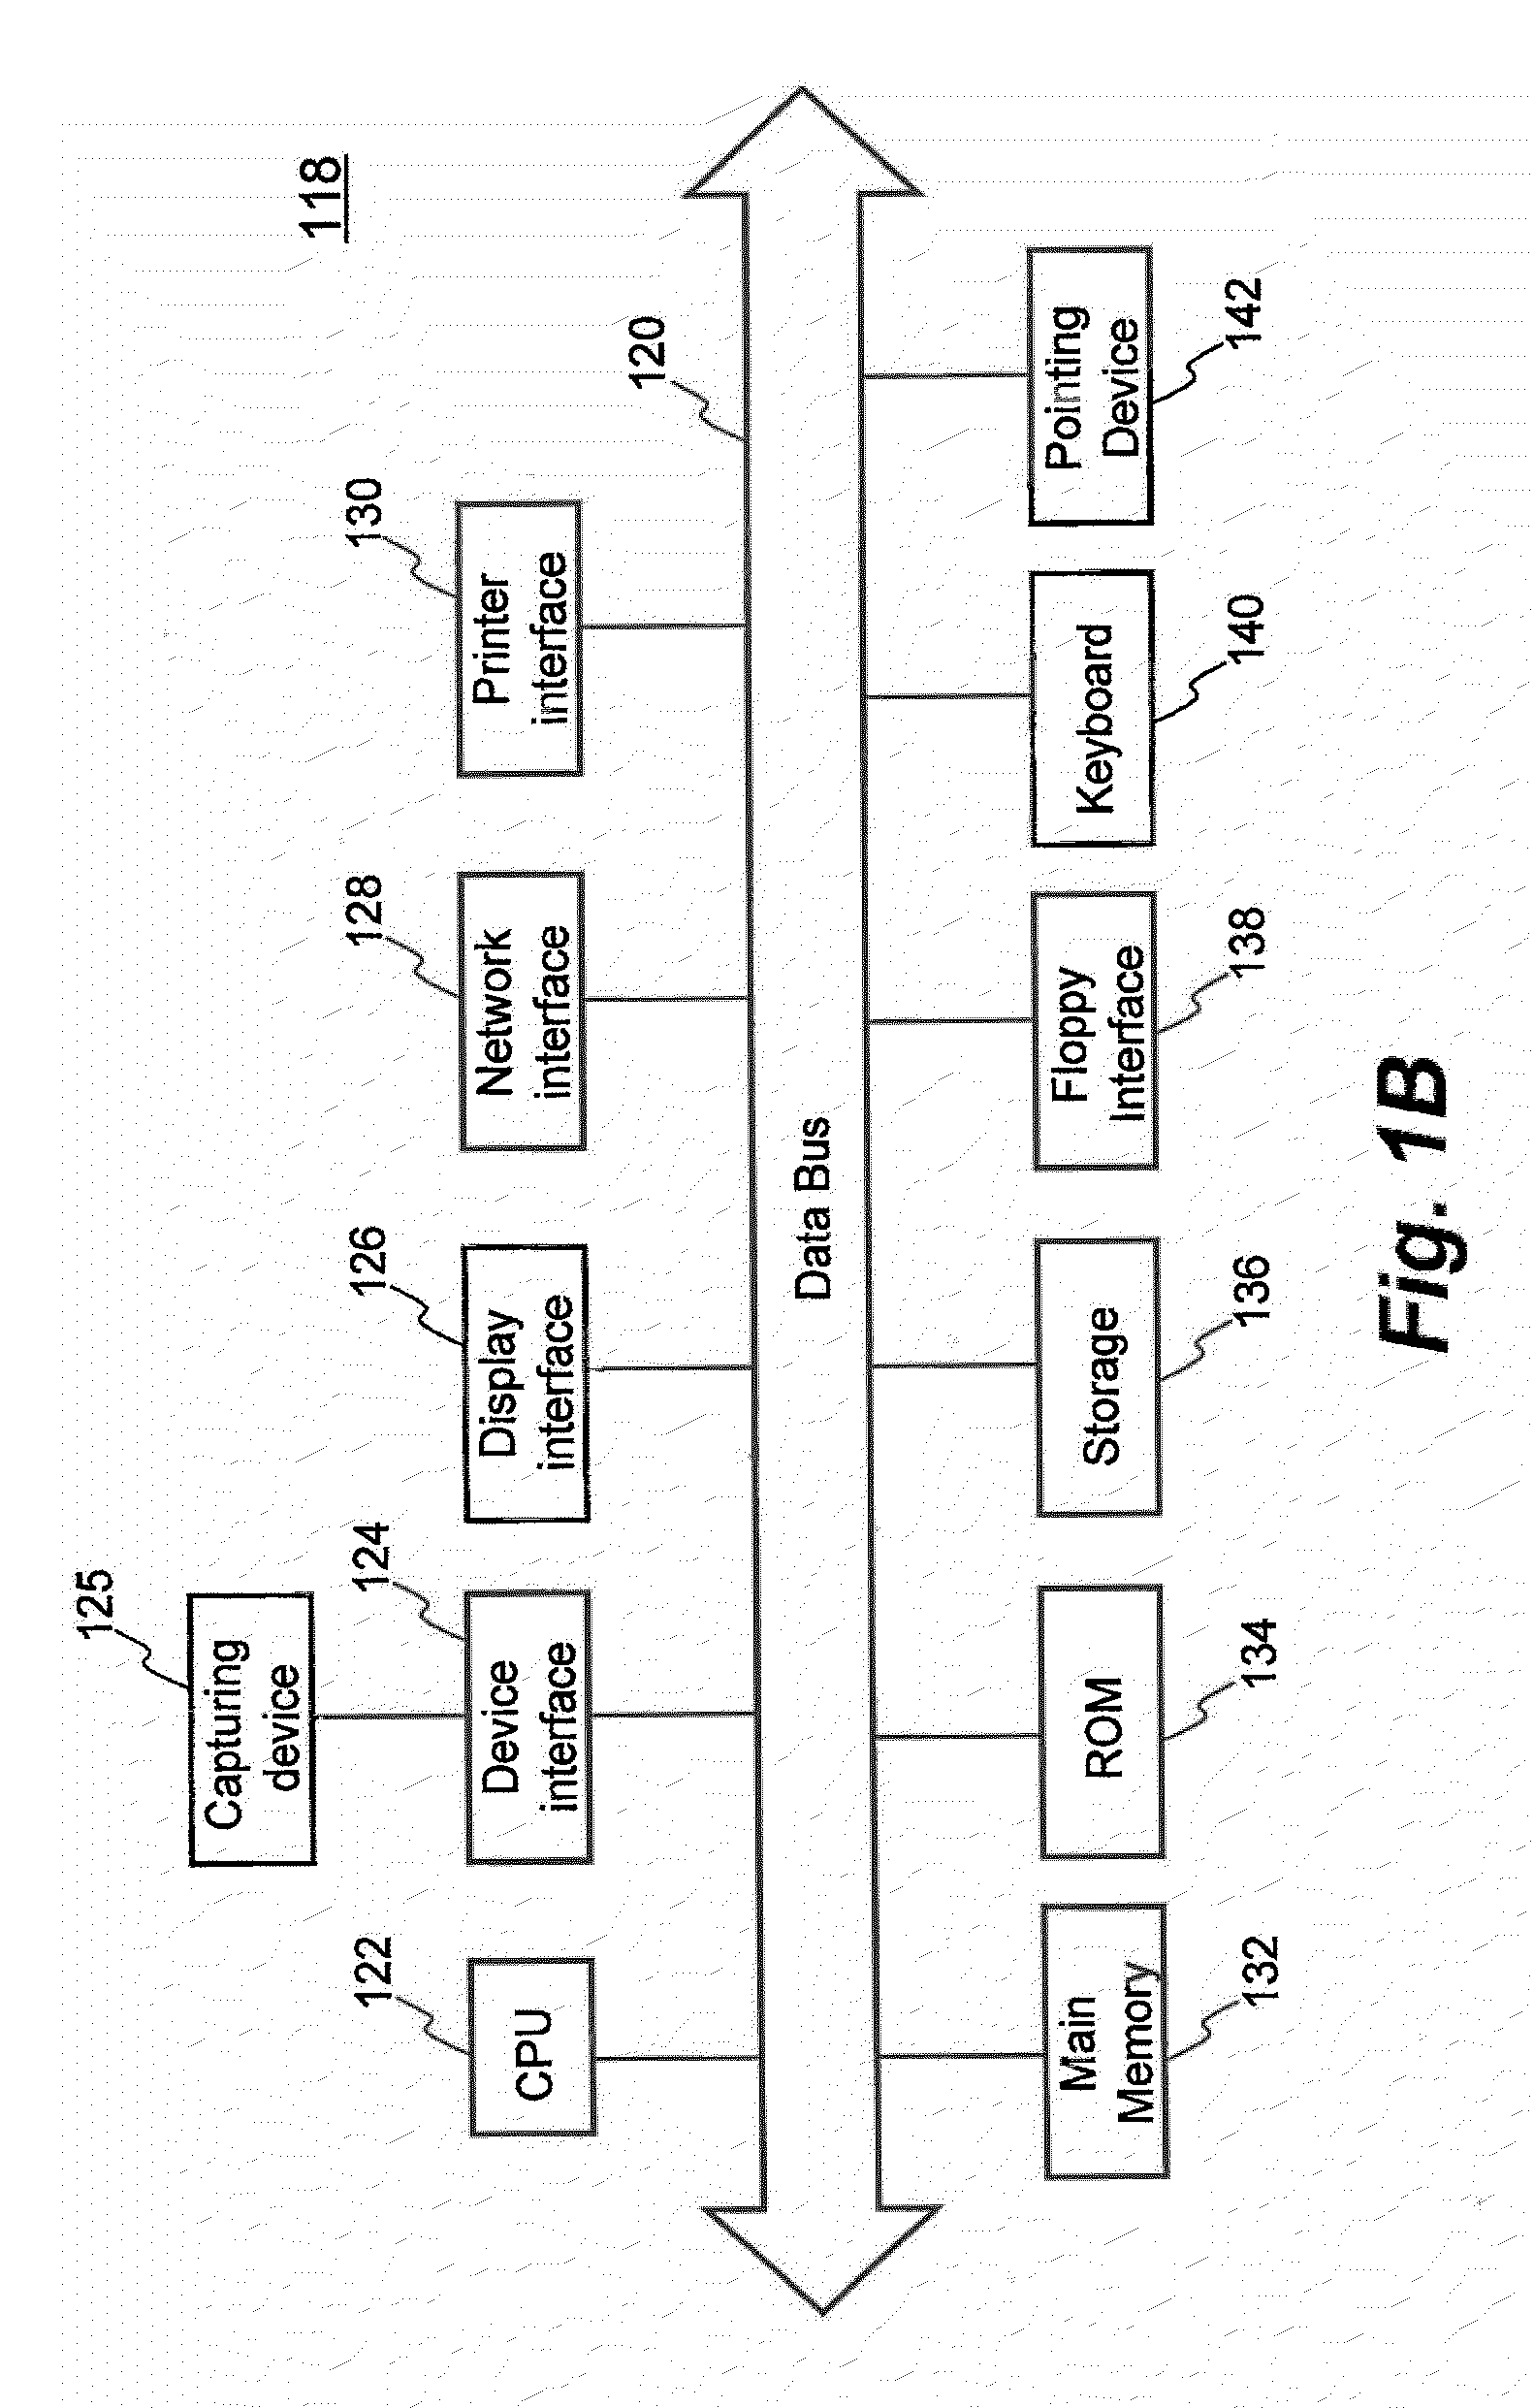 System and Method for Providing Different Levels of Key Security for Controlling Access to Secured Items